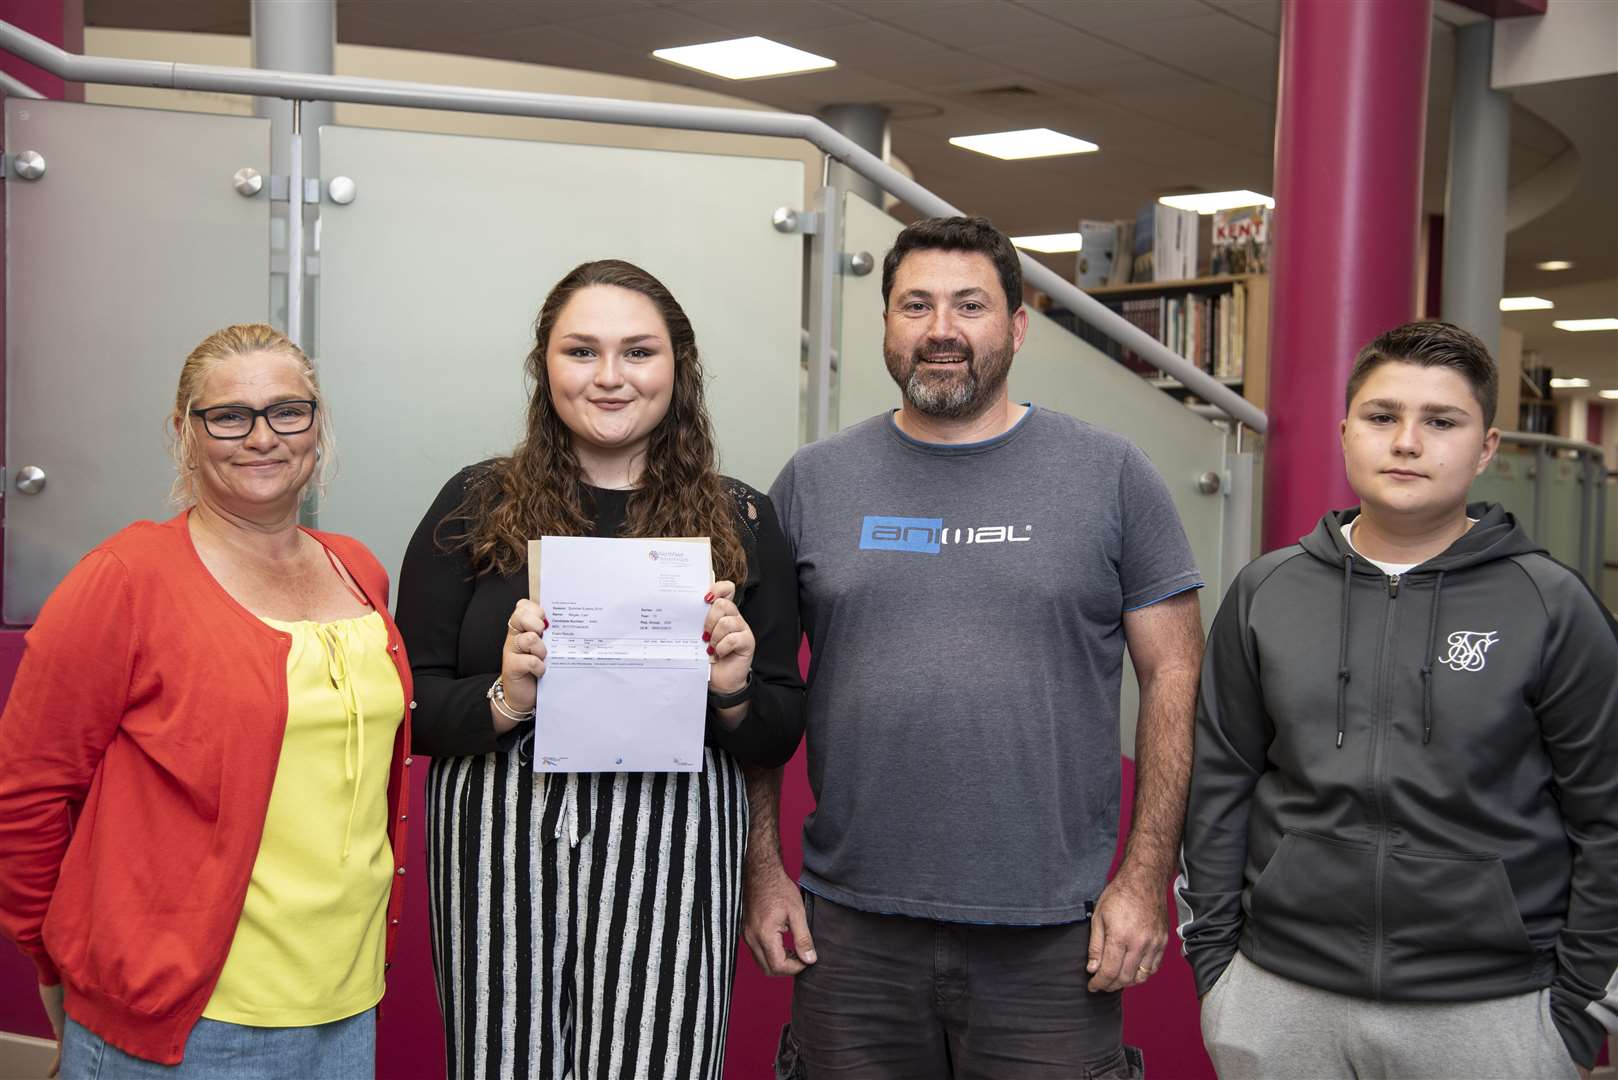 KM editorial apprentice Megan Carr with her parents and brother (15280497)